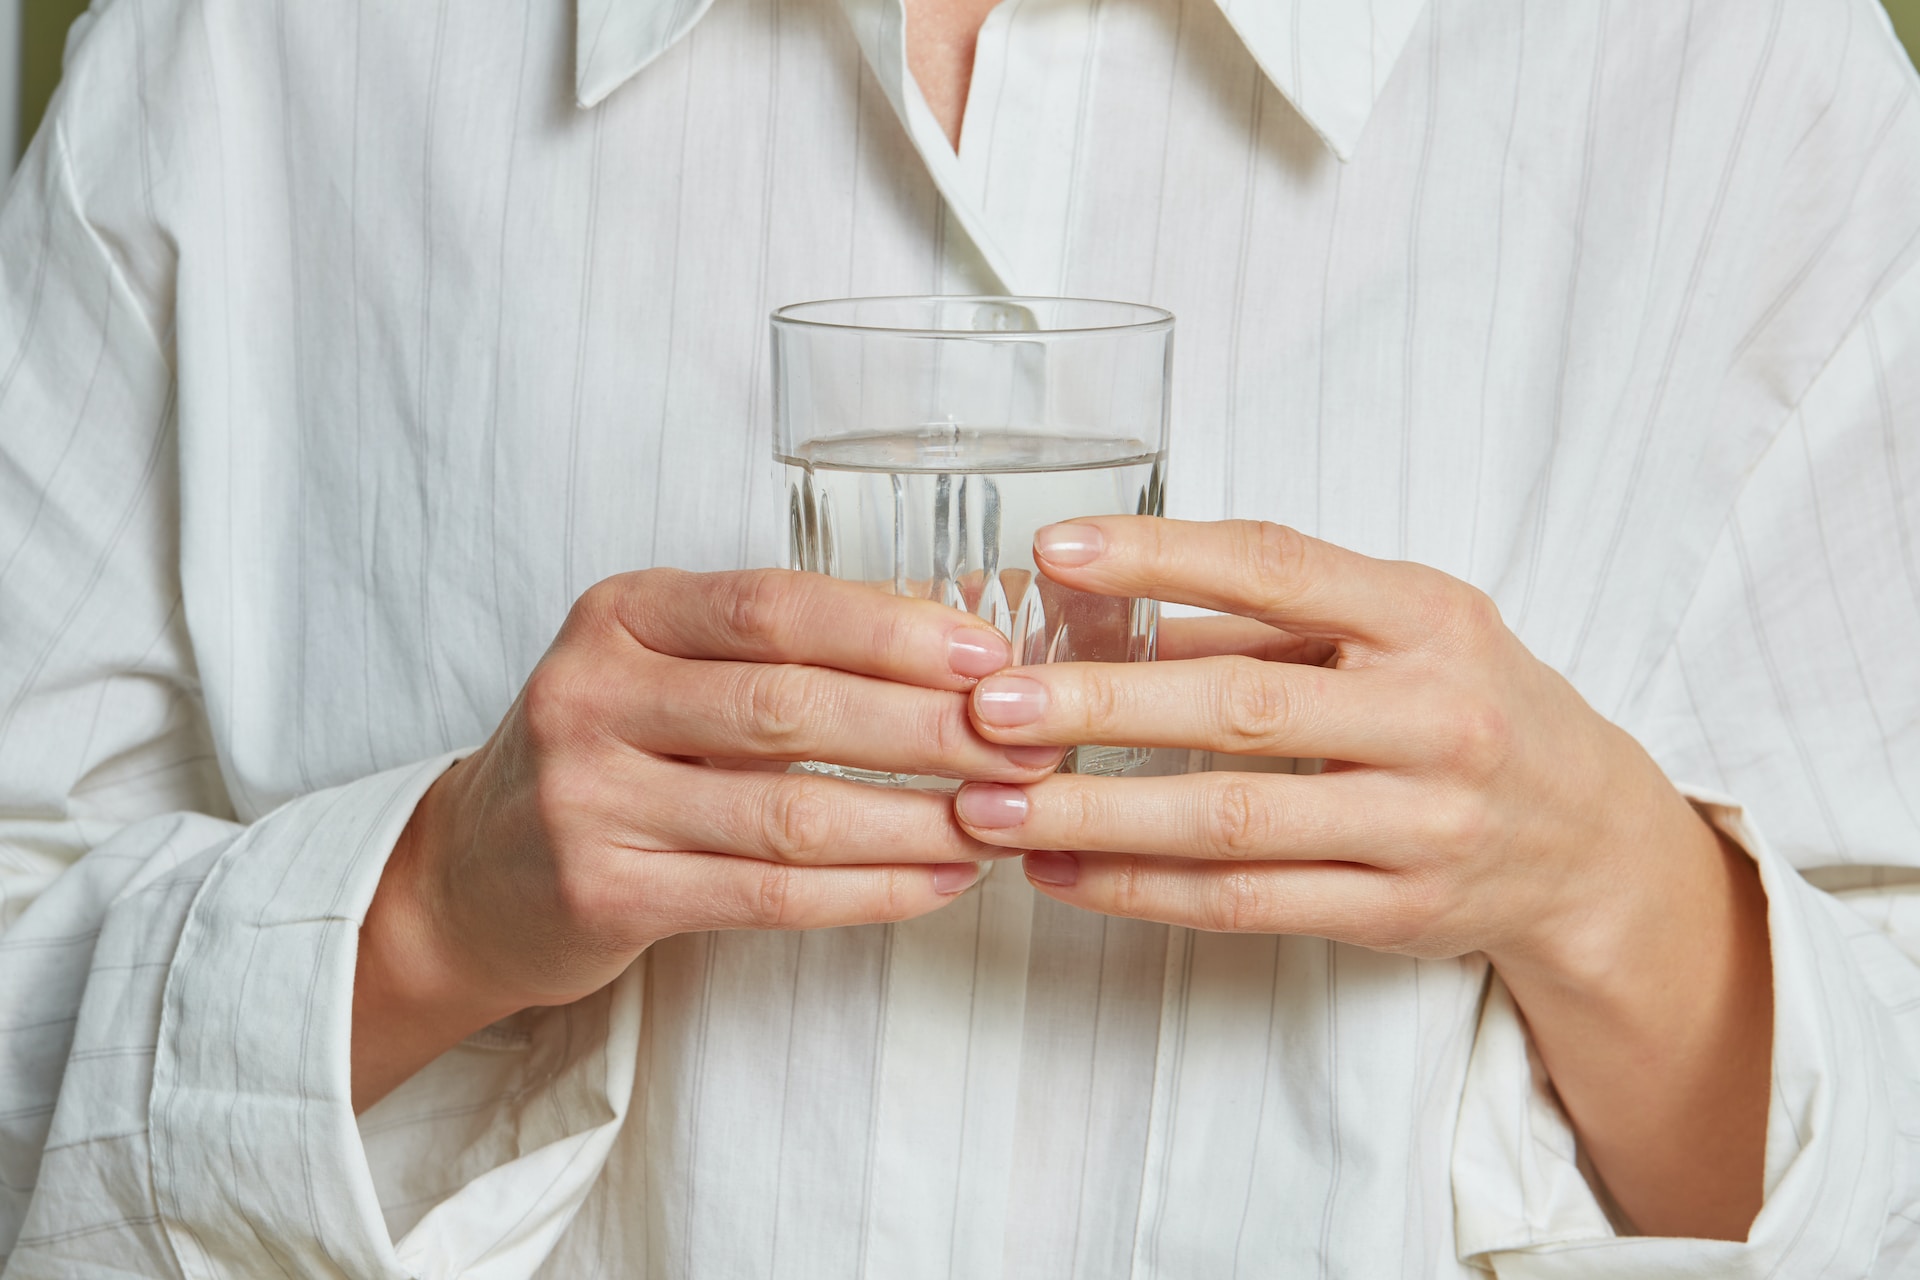 Dehydration, holding a glass of water